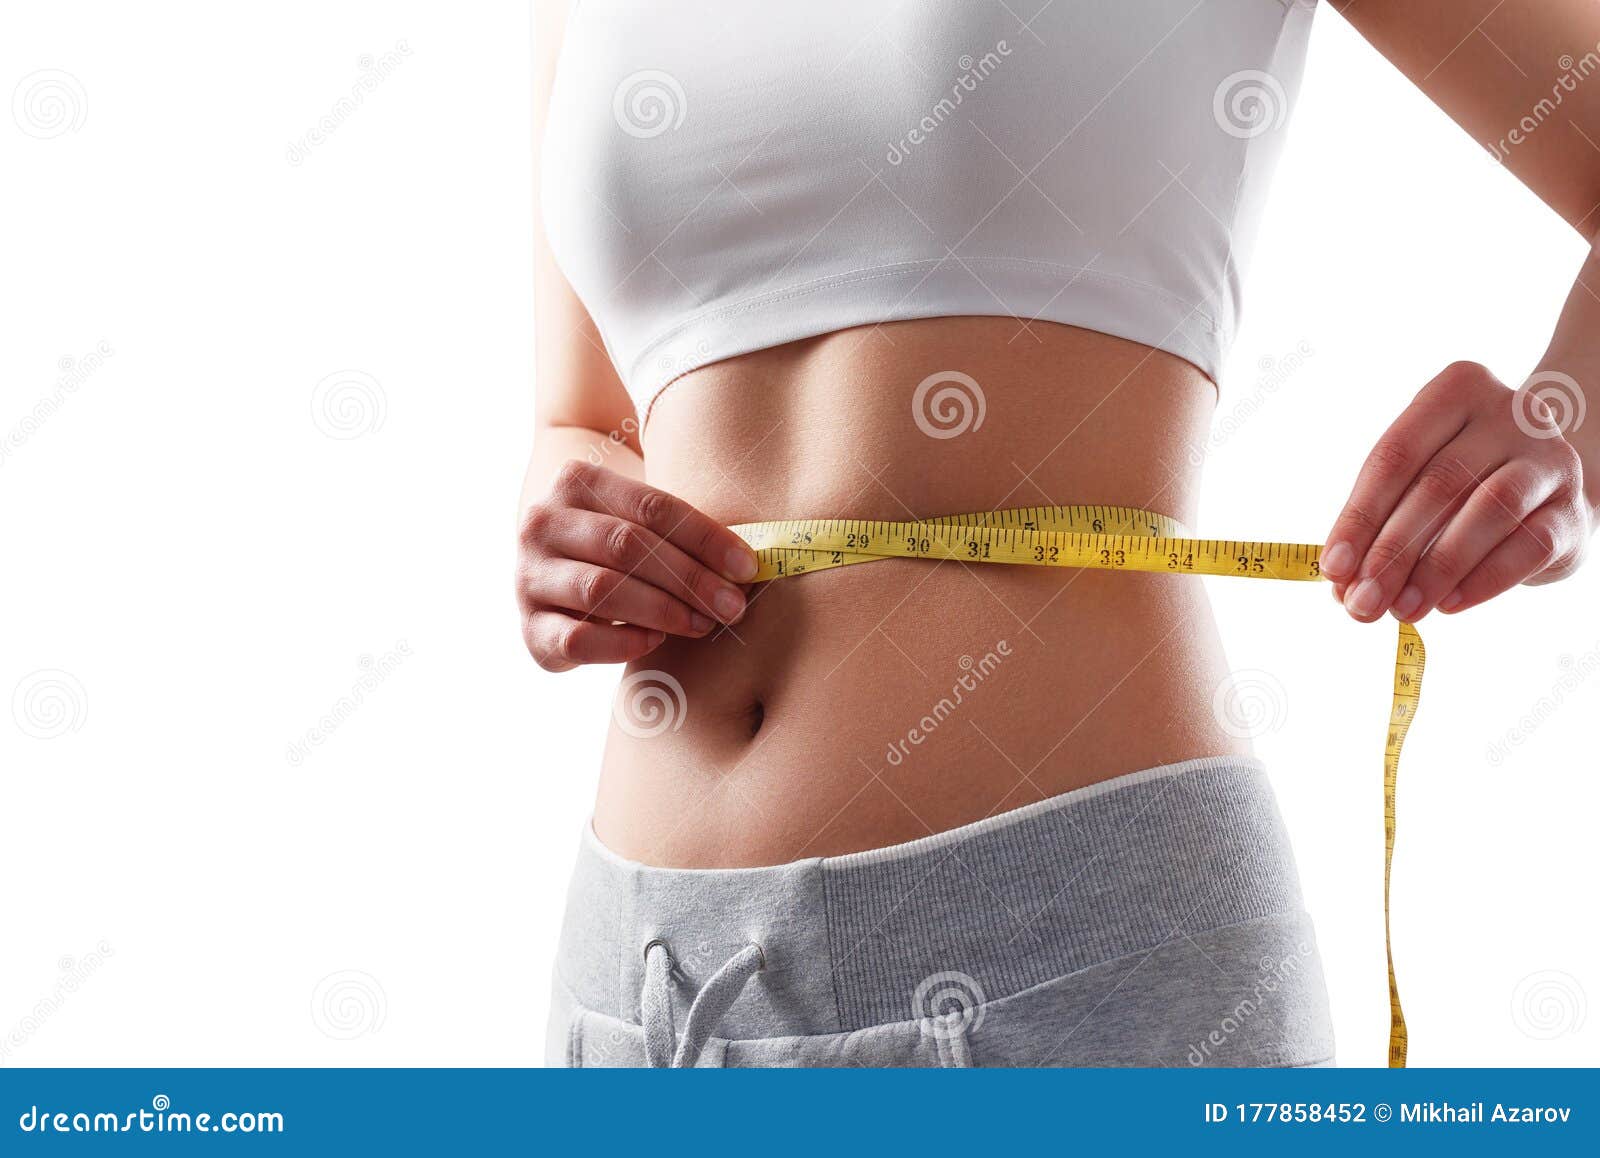 Slim young woman measuring her thin waist with a tape measure, close up  Stock Photo